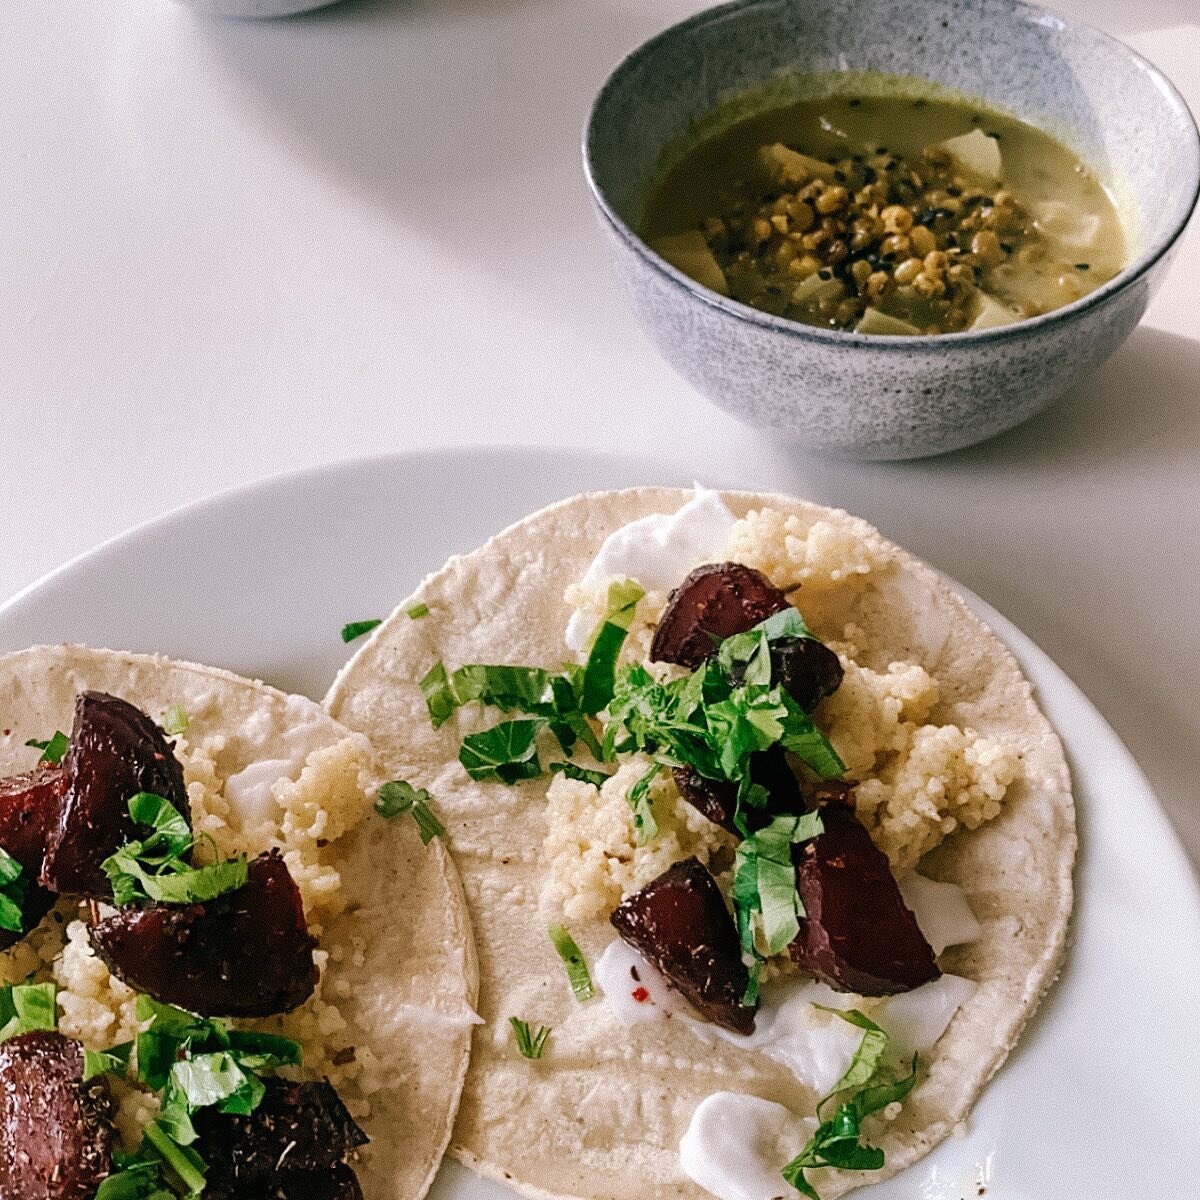 Missing M&eacute;xico &amp; my family there big time&hellip; so I whipped some Ayurvedic tortillas while co-working. 🌮 

Corn tortilla with vegan creme cheese, spiced millet, oven-roasted beetroot with herbs, parsley &amp; fennel with whole mung bea